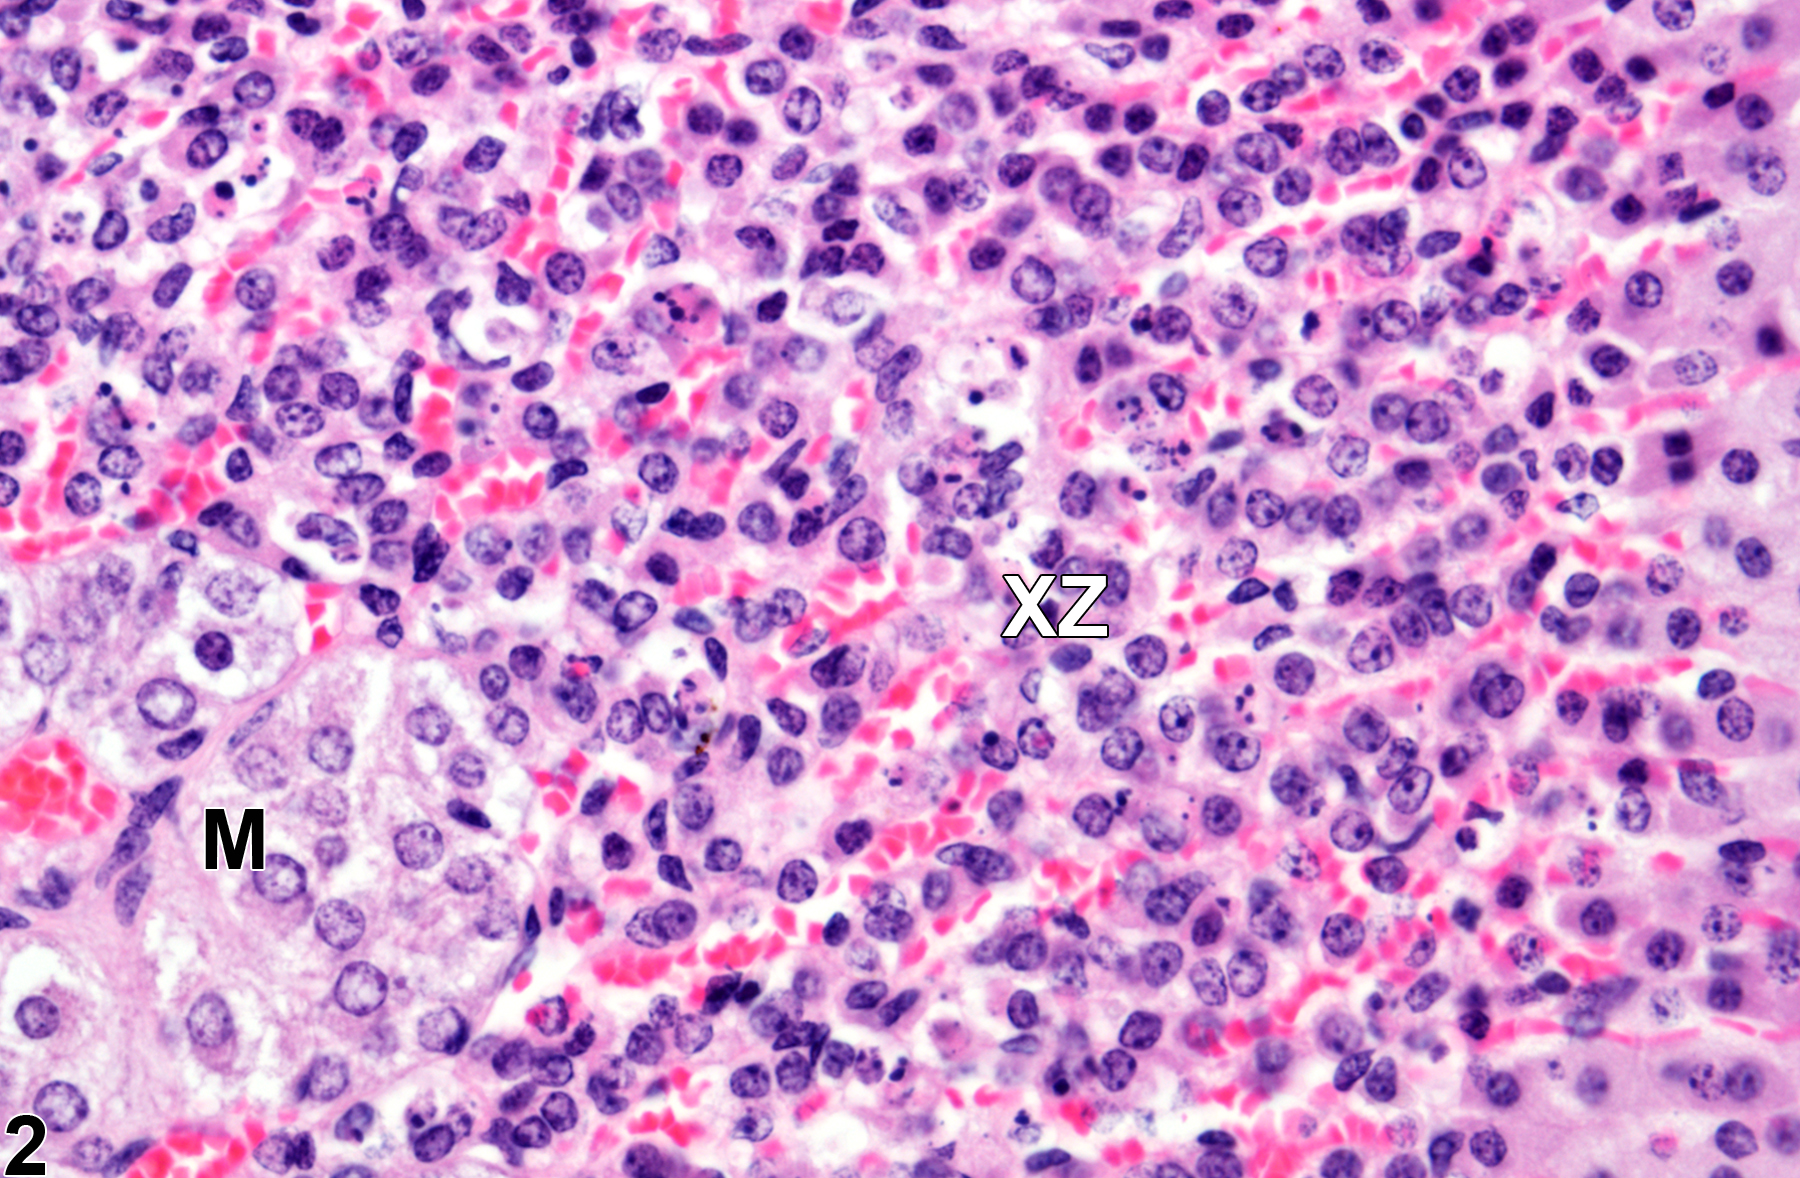 Image of atrophy in the adrenal gland cortex x-zone from a female B6C3F1/N mouse in a subchronic study